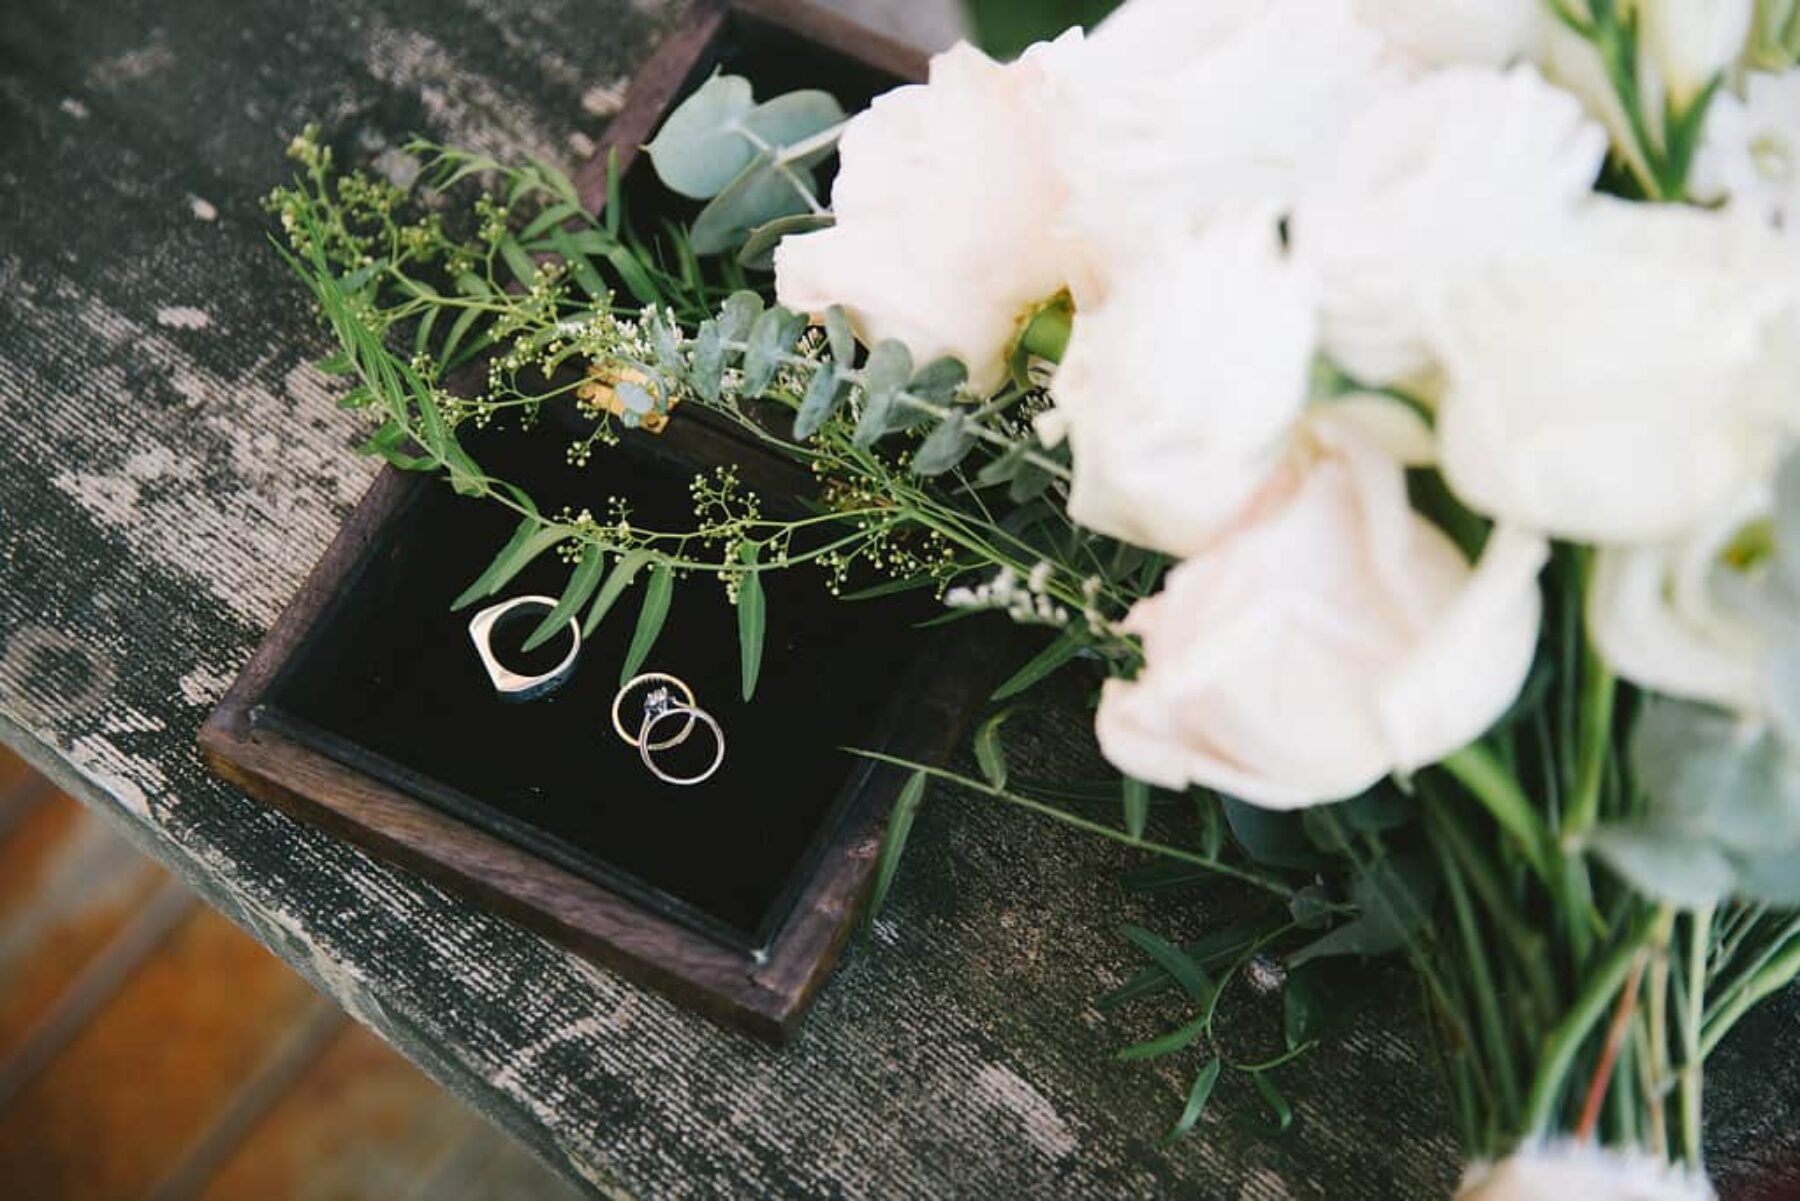 Intimate Hunter Valley wedding - photography by Kait Barker